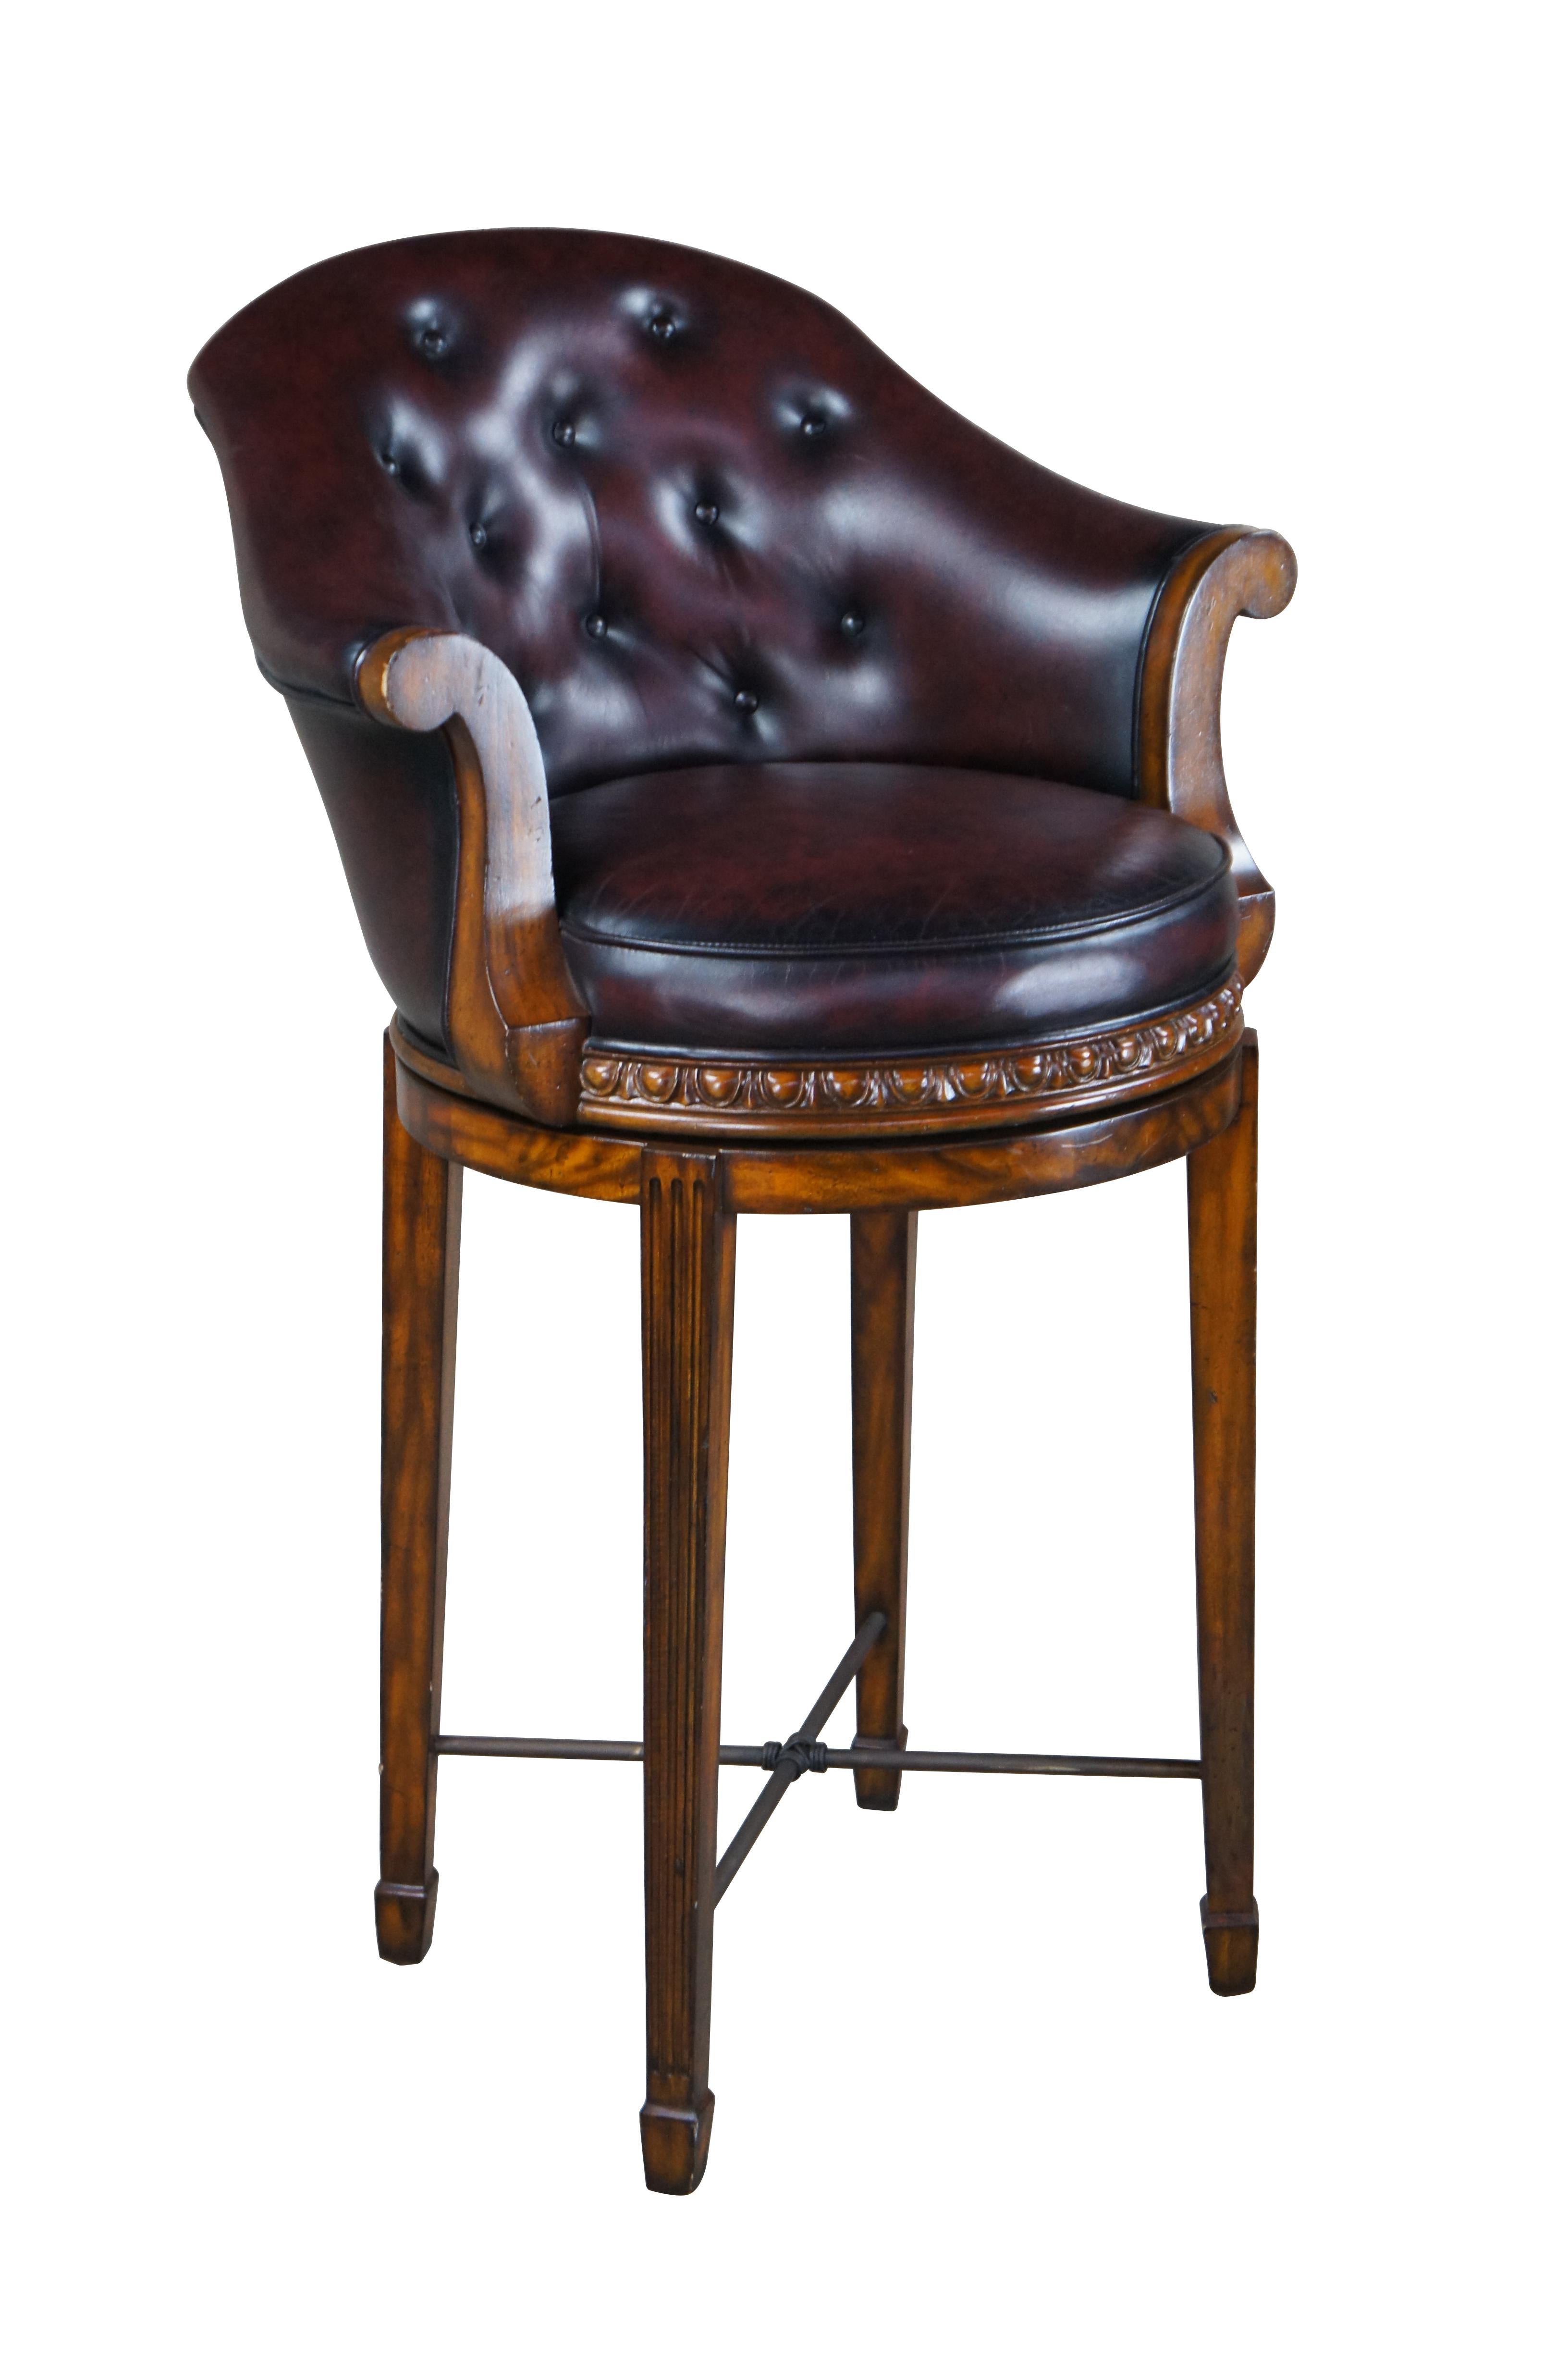 Vintage Theodore Alexander swivel bar or counter stool.  Made of flamed mahogany featuring flared arms, domed back and tufted leather.

Dimensions:
26